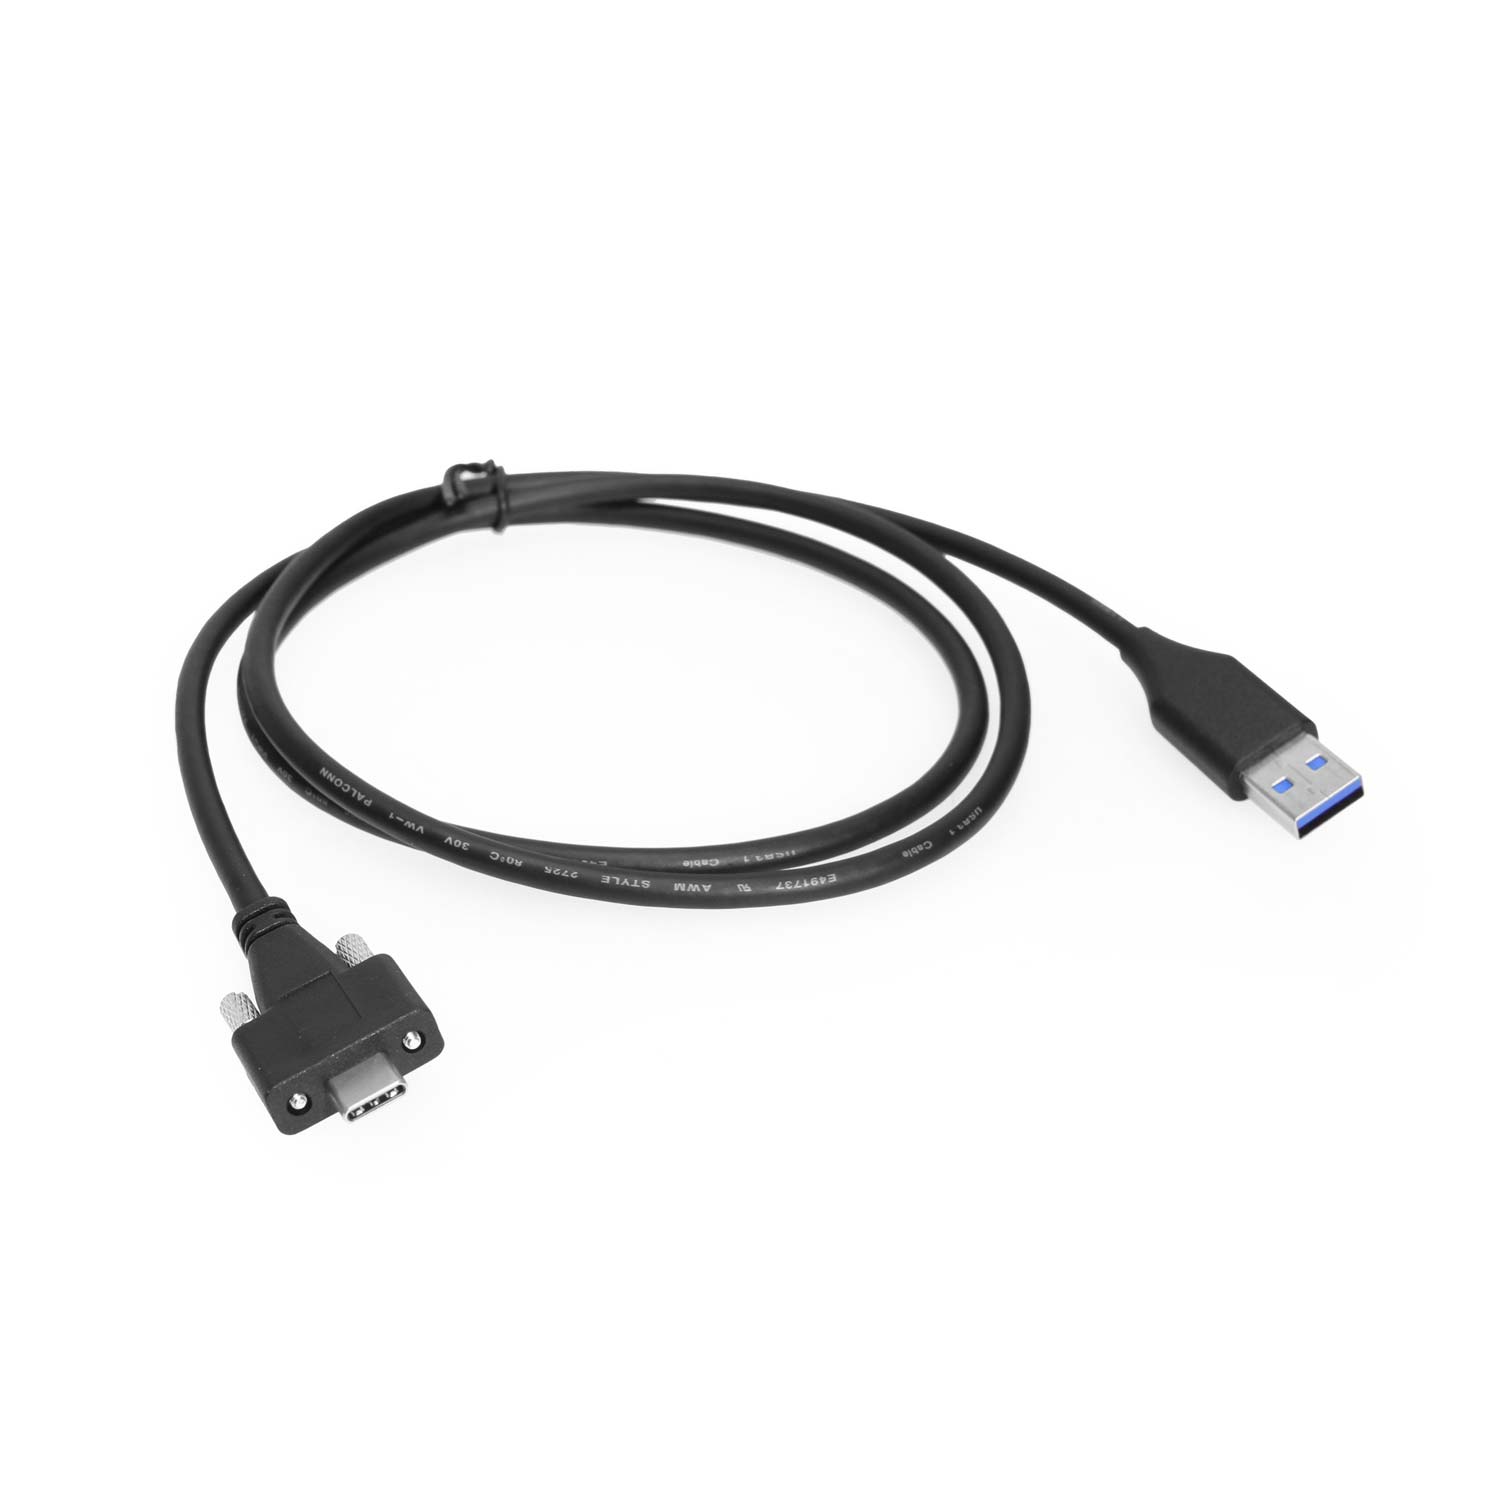 1.8m USB-C to USB-C Cable 3A, Black